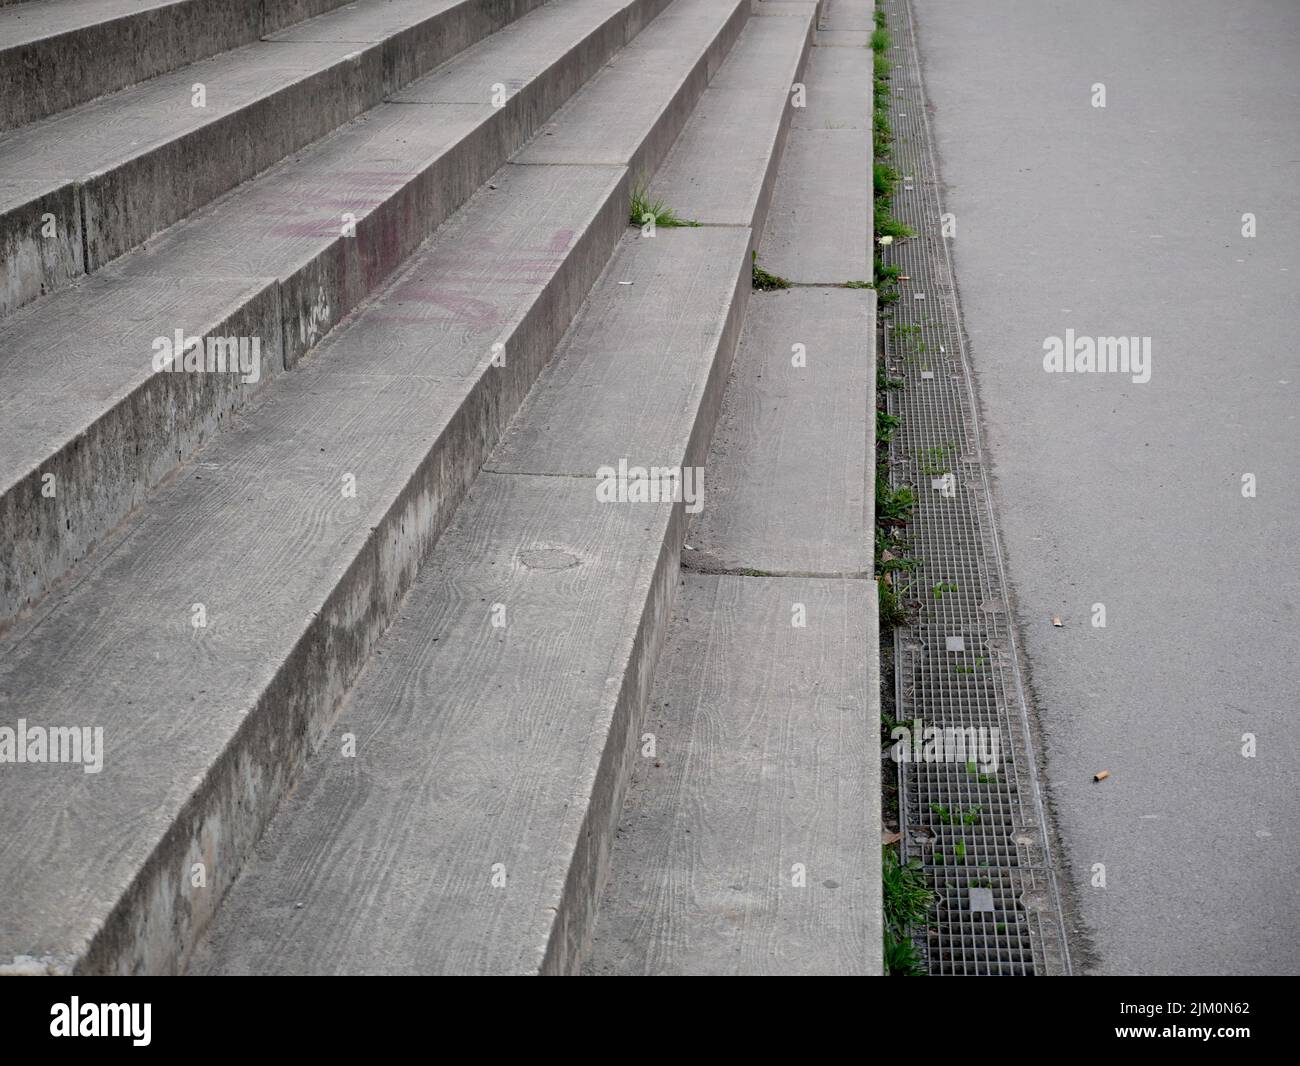 Aligned staircase at Berline velodrom made of concrete Stock Photo